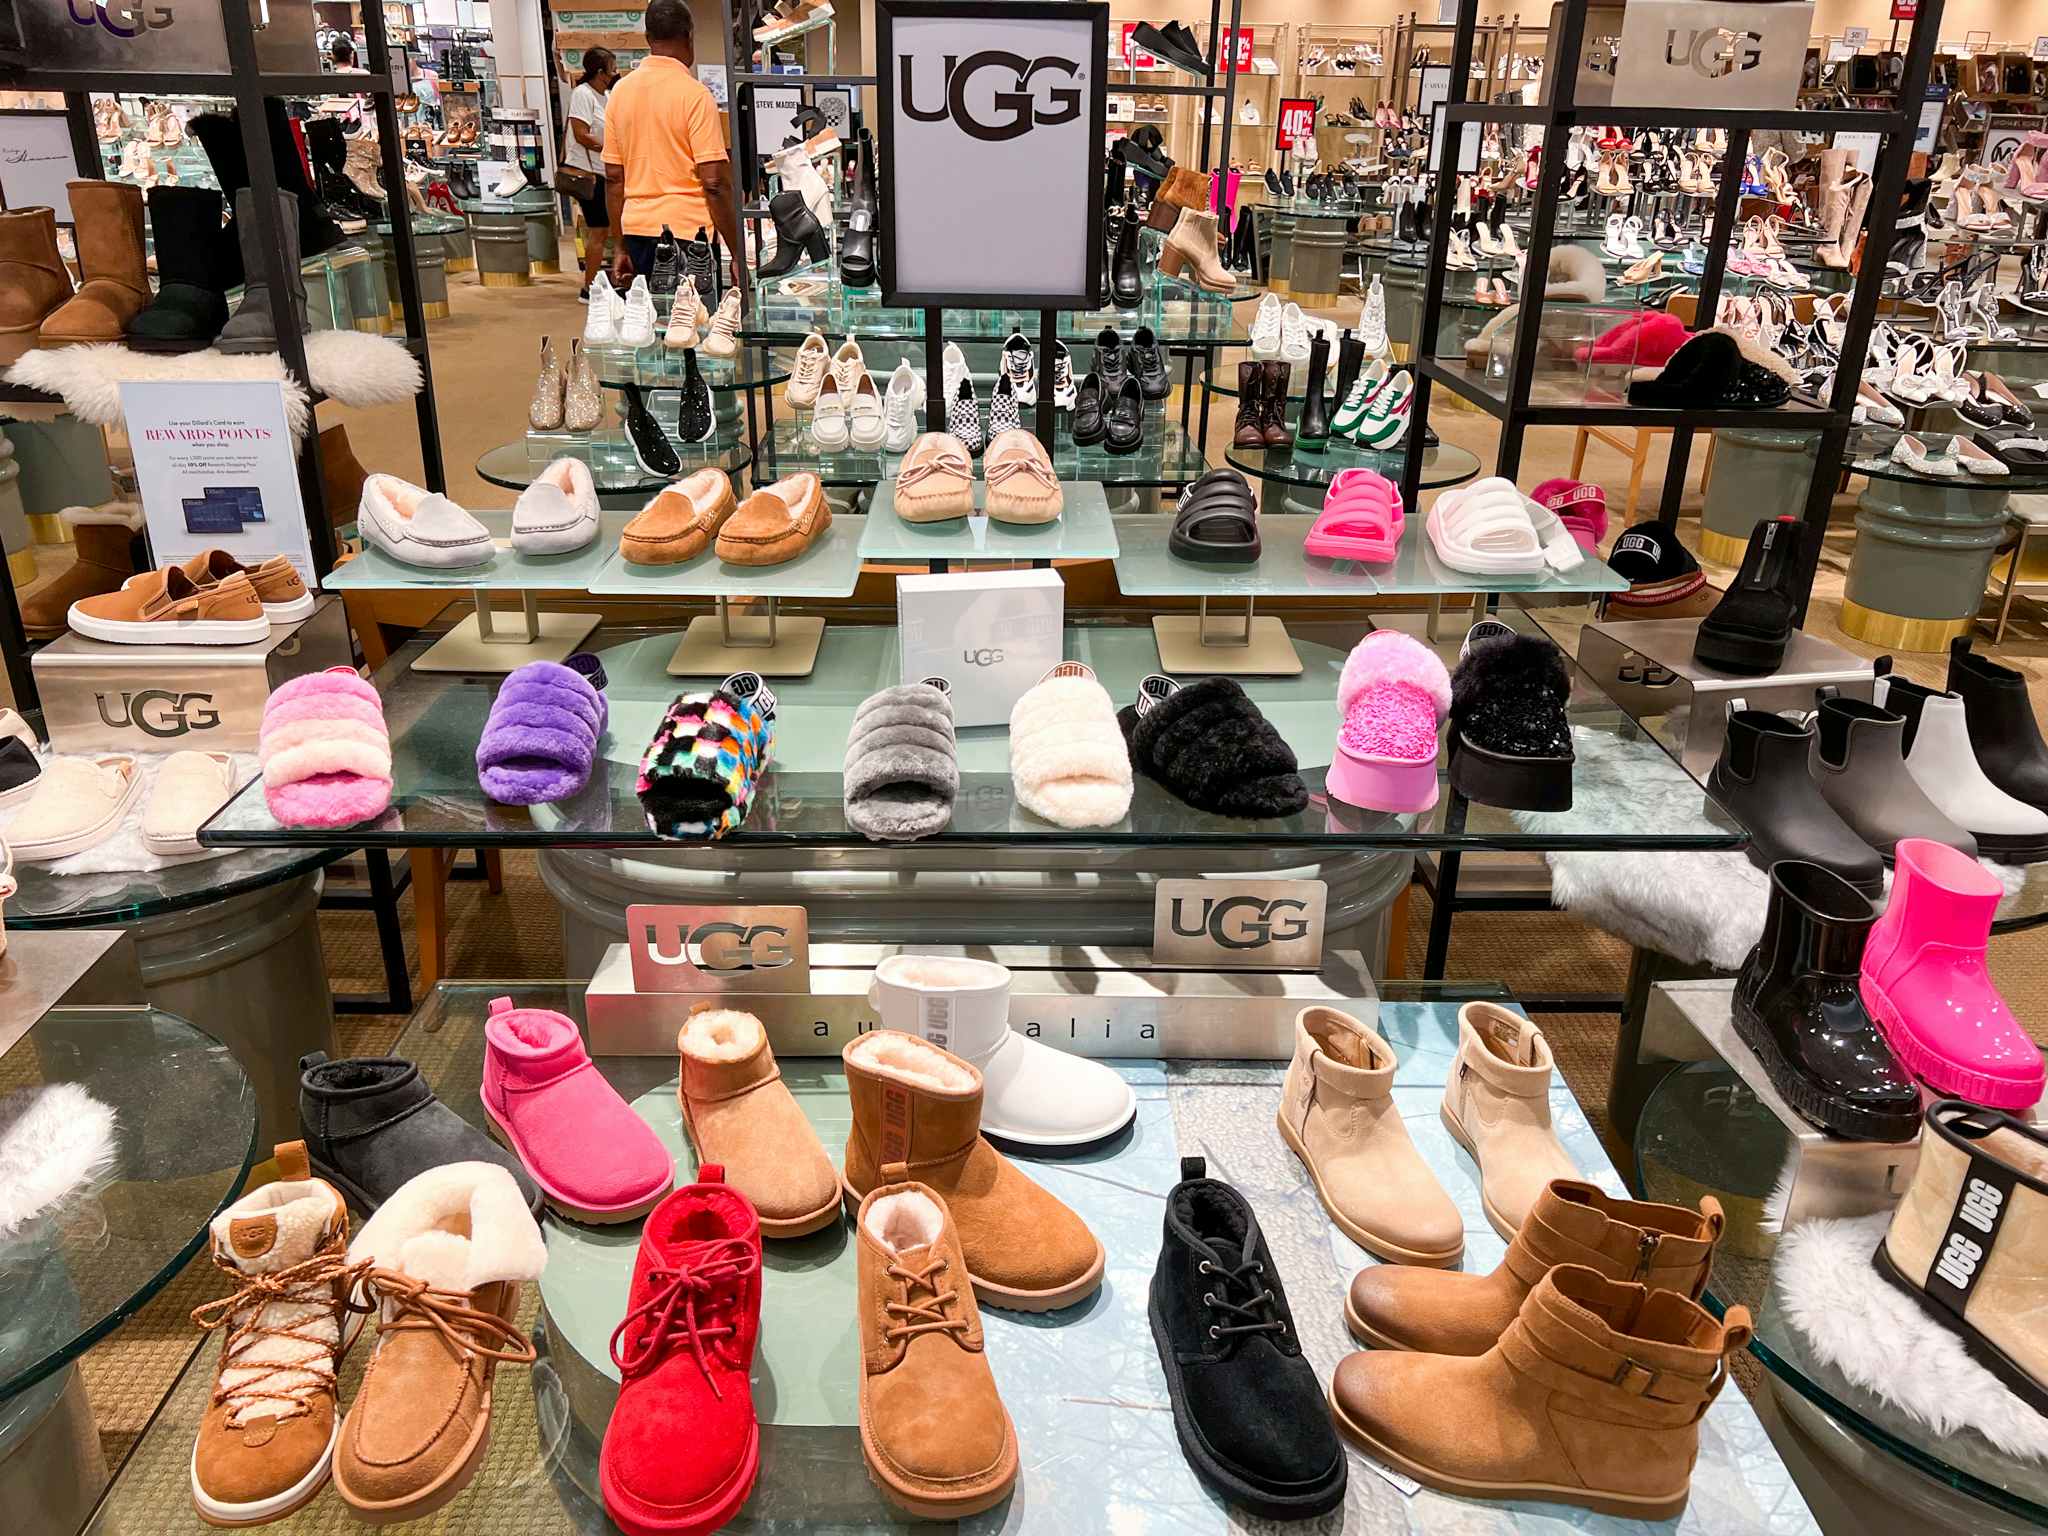 An area shot of Ugg brand shoes, slippers, sandals, and boots